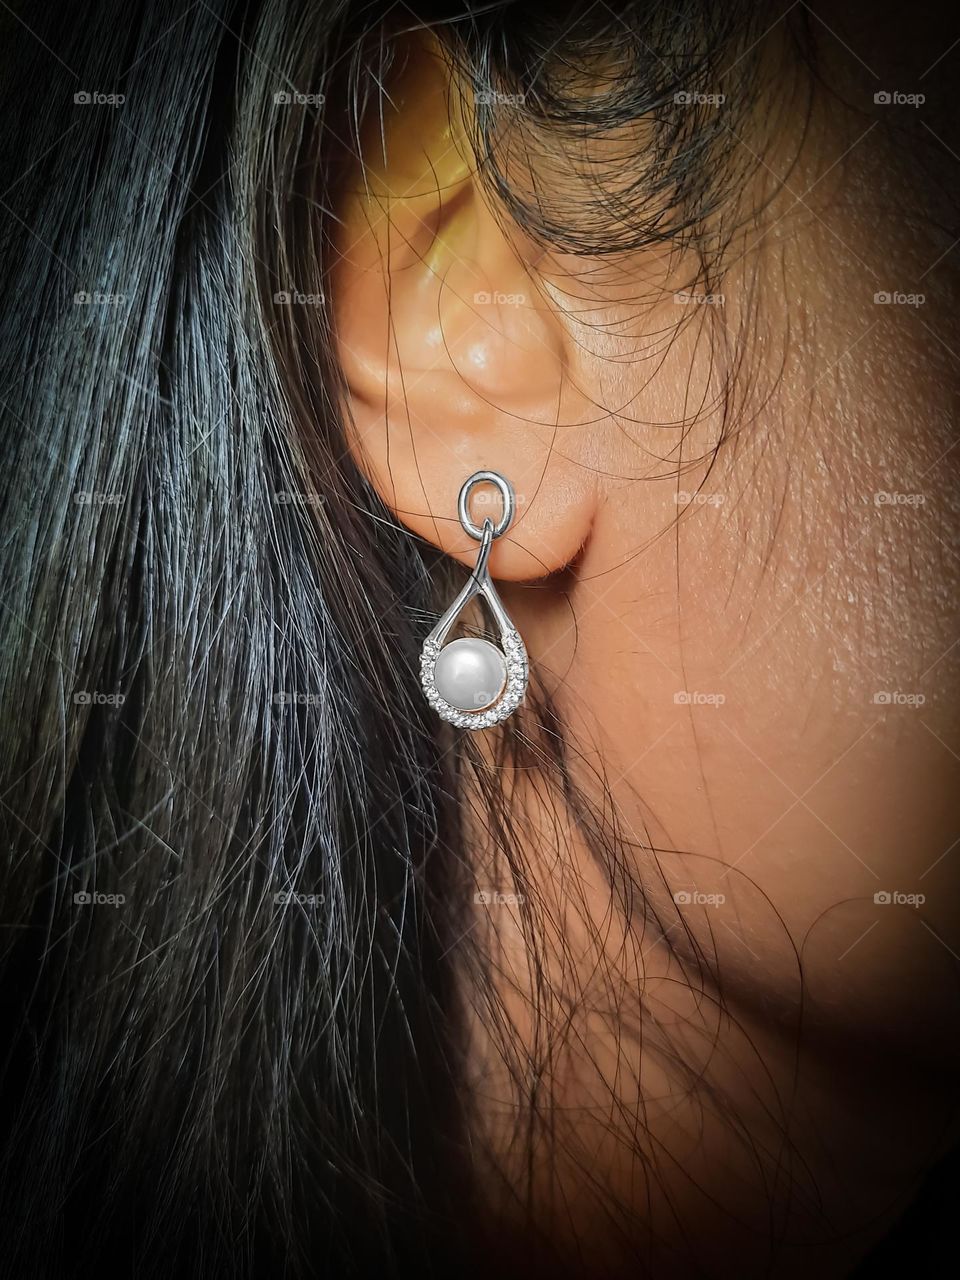 Wearing favourite jewellery. A silver earring with fresh water pearl and stones. The perfect party wear.